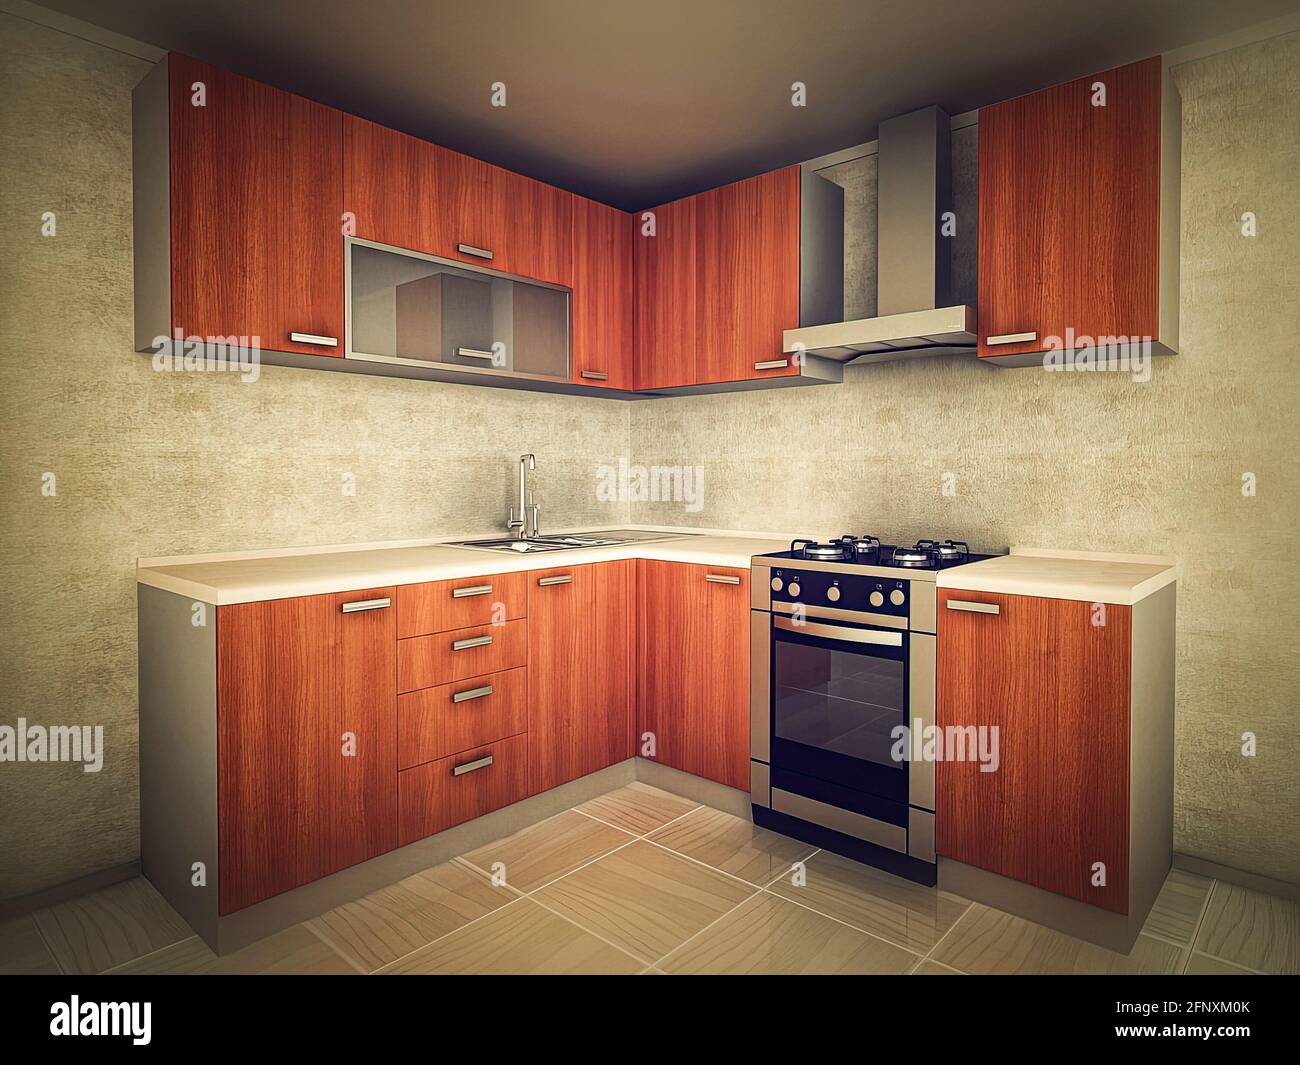 3d illustration of modern kitchen design concept in traditional style. Interior design of the kitchen in light colors. Stock Photo